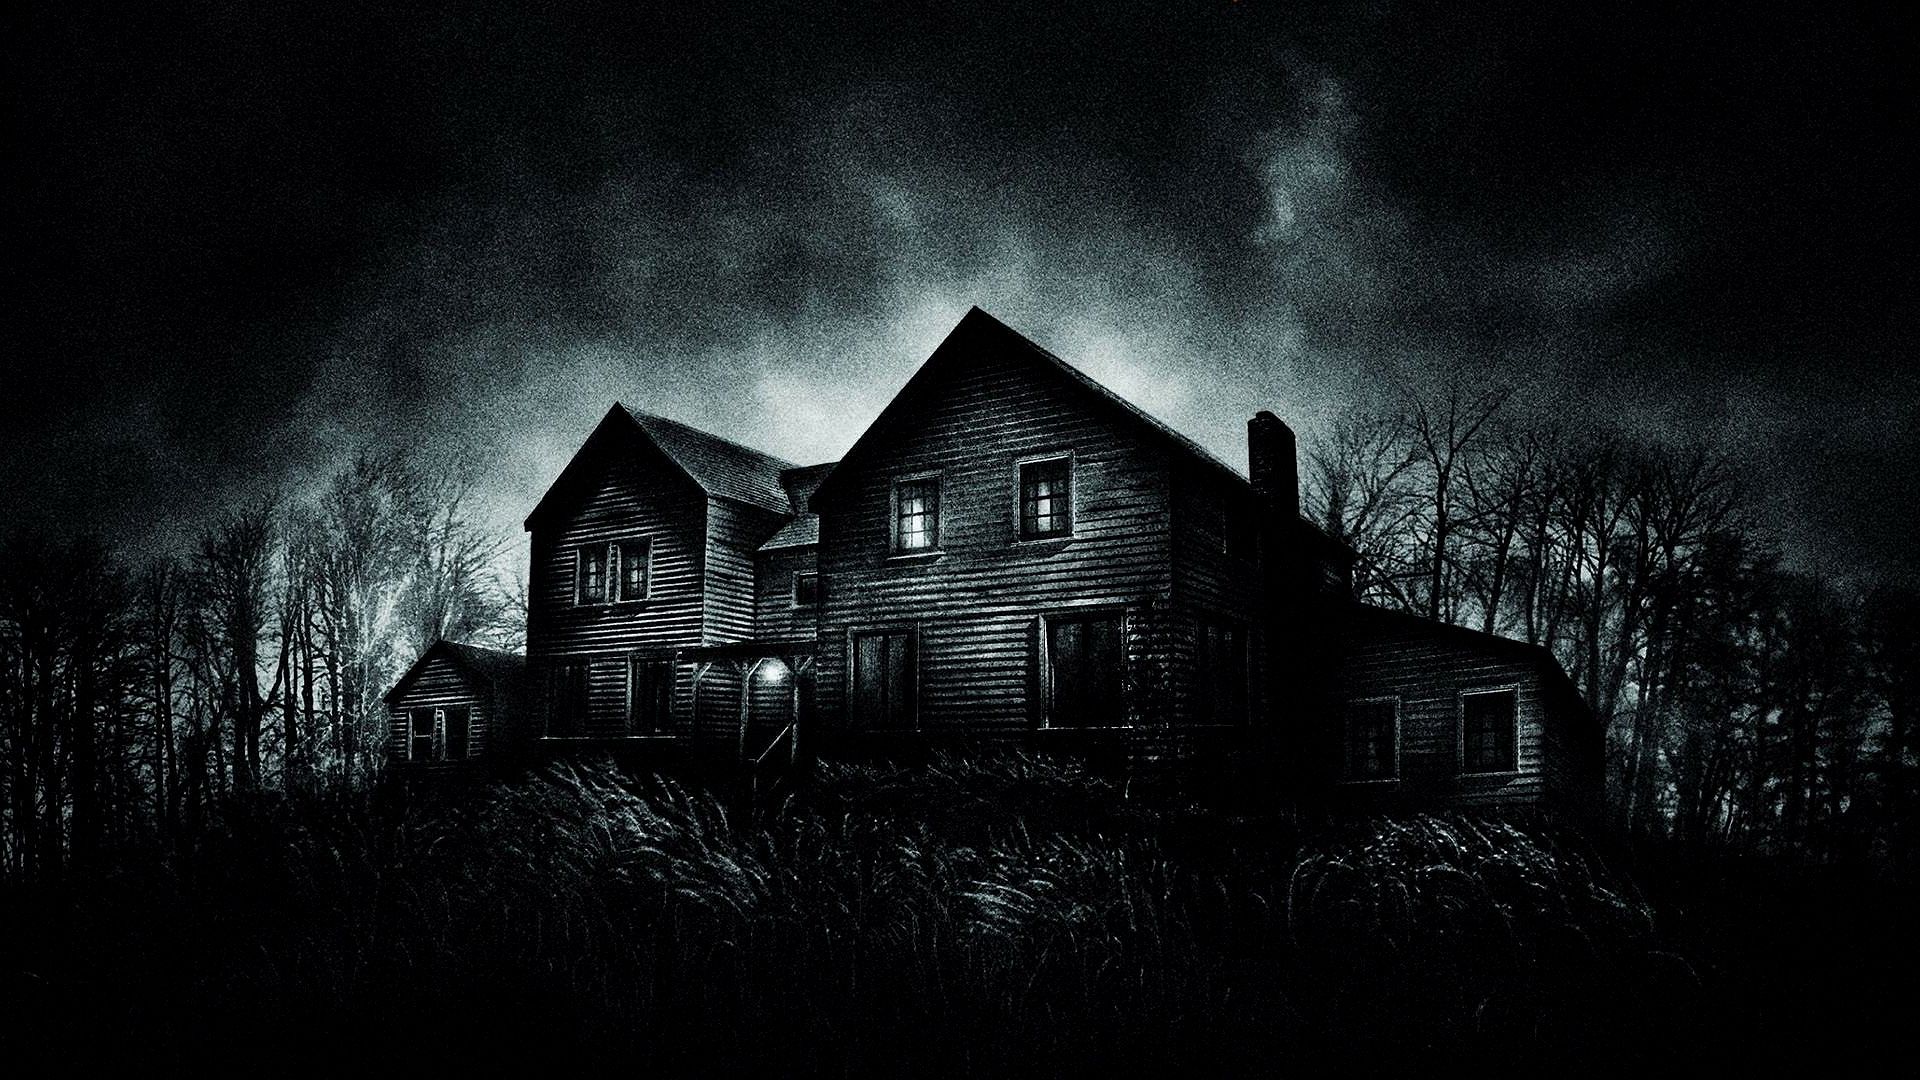 The Last House on the Left background